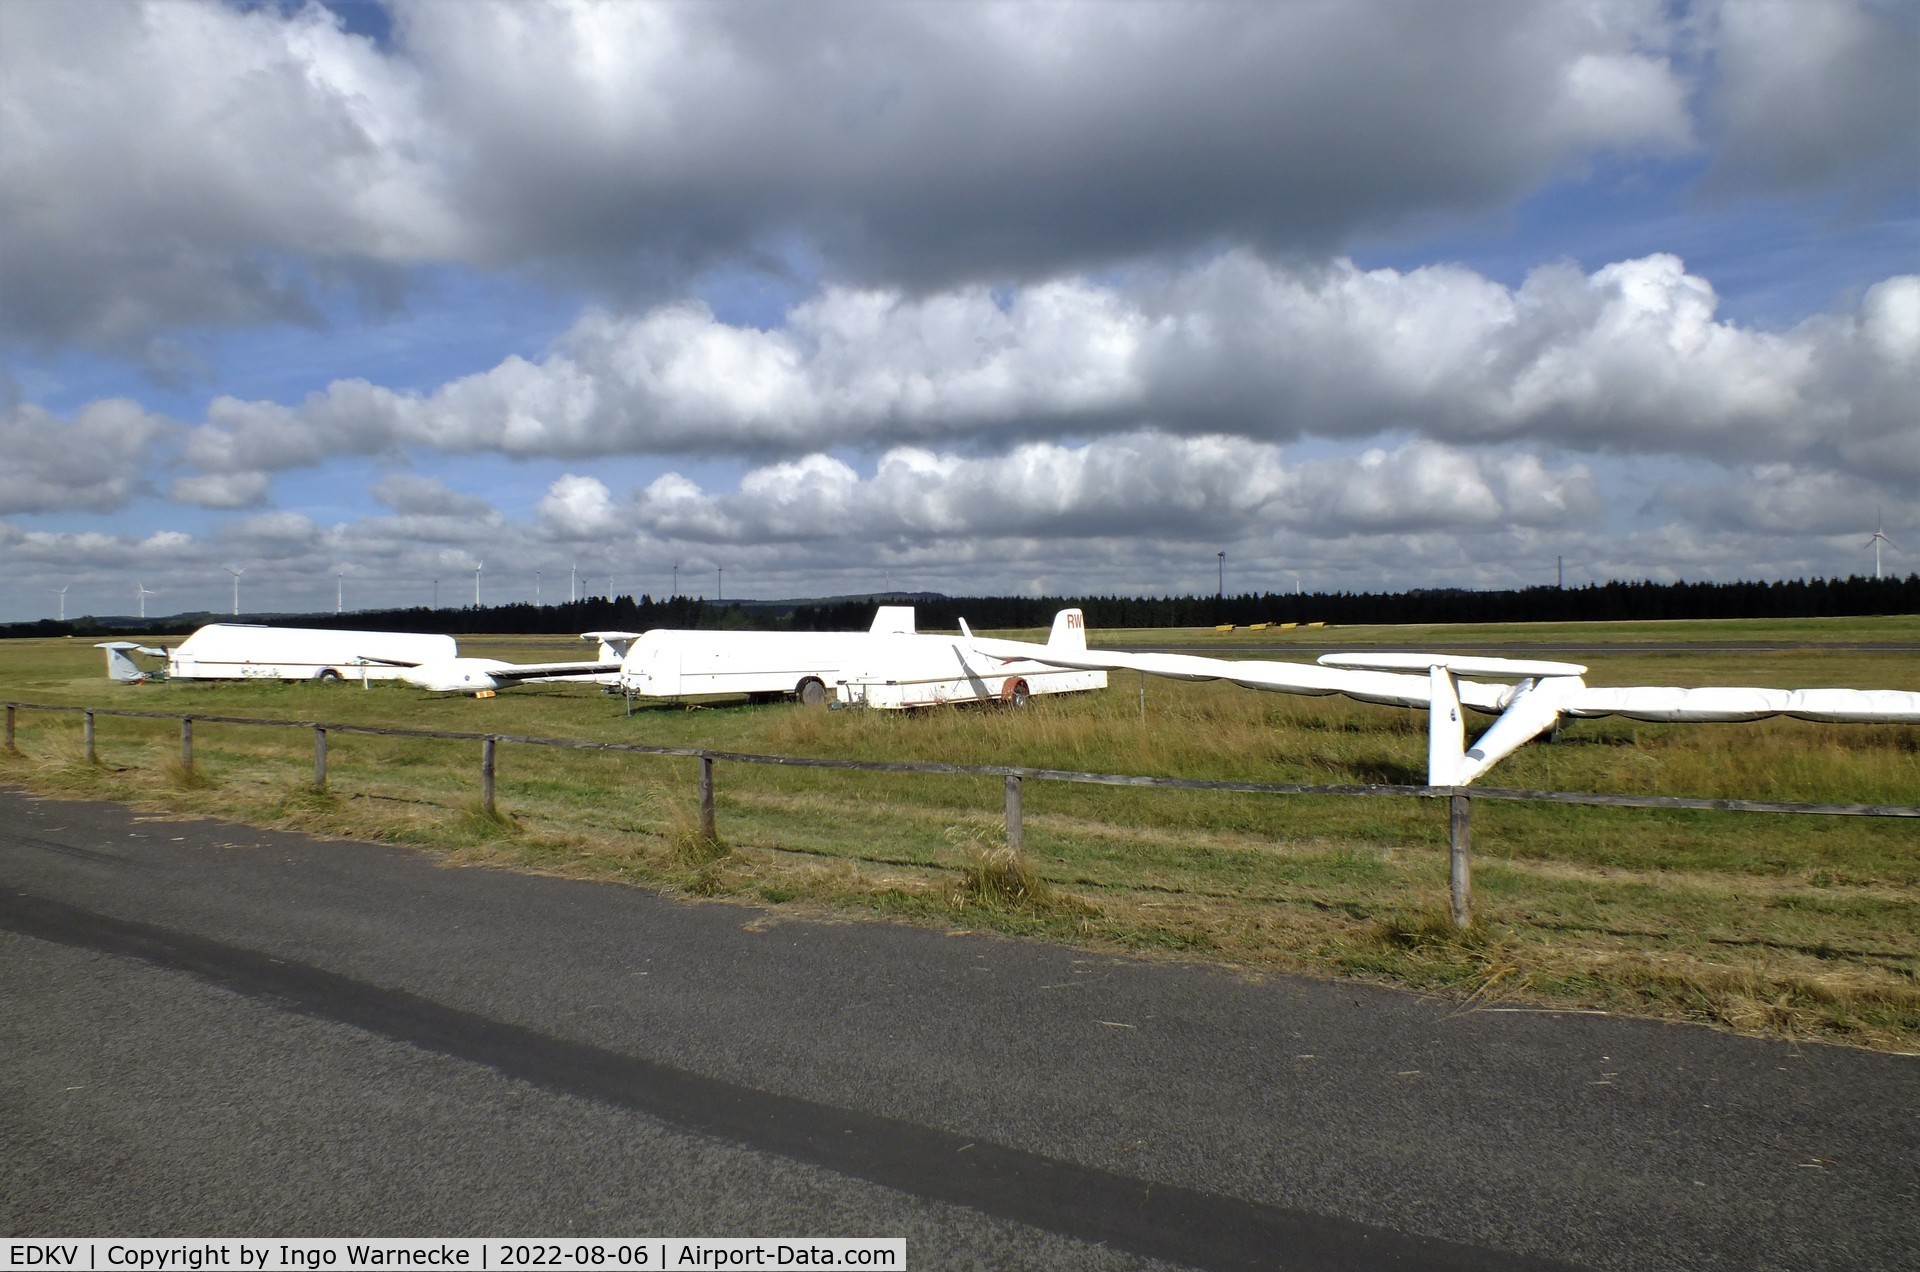 Dahlemer Binz Airport, Dahlem Germany (EDKV) - gliders parked at Dahlemer Binz airfield